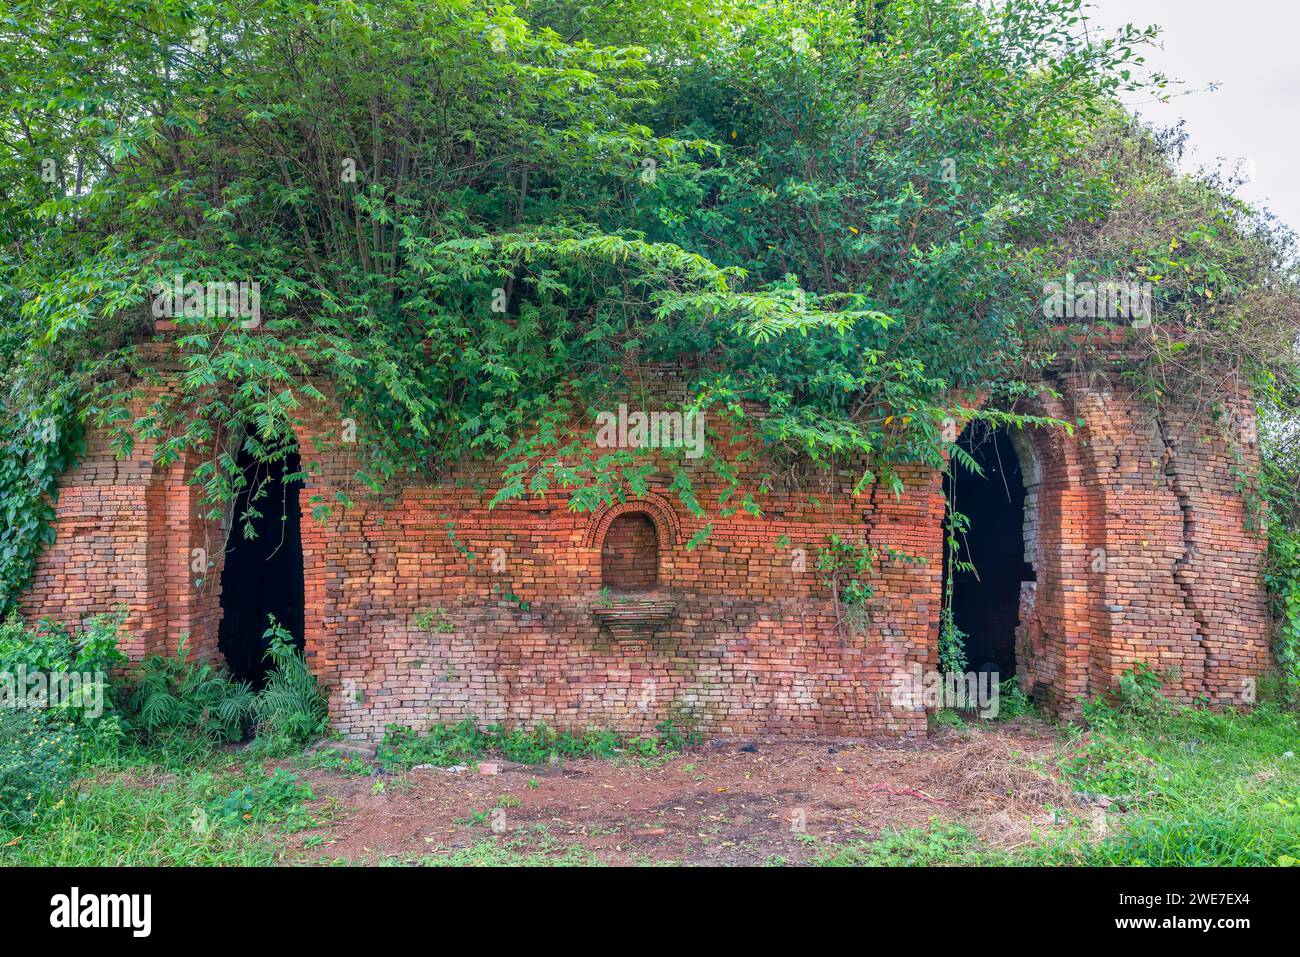 Abandoned brick kilns in Phu Son, Cho Lach, Ben Tre, Vietnam. This place used to trade handmade baked bricks near the Mekong River in Vietnam Stock Photo